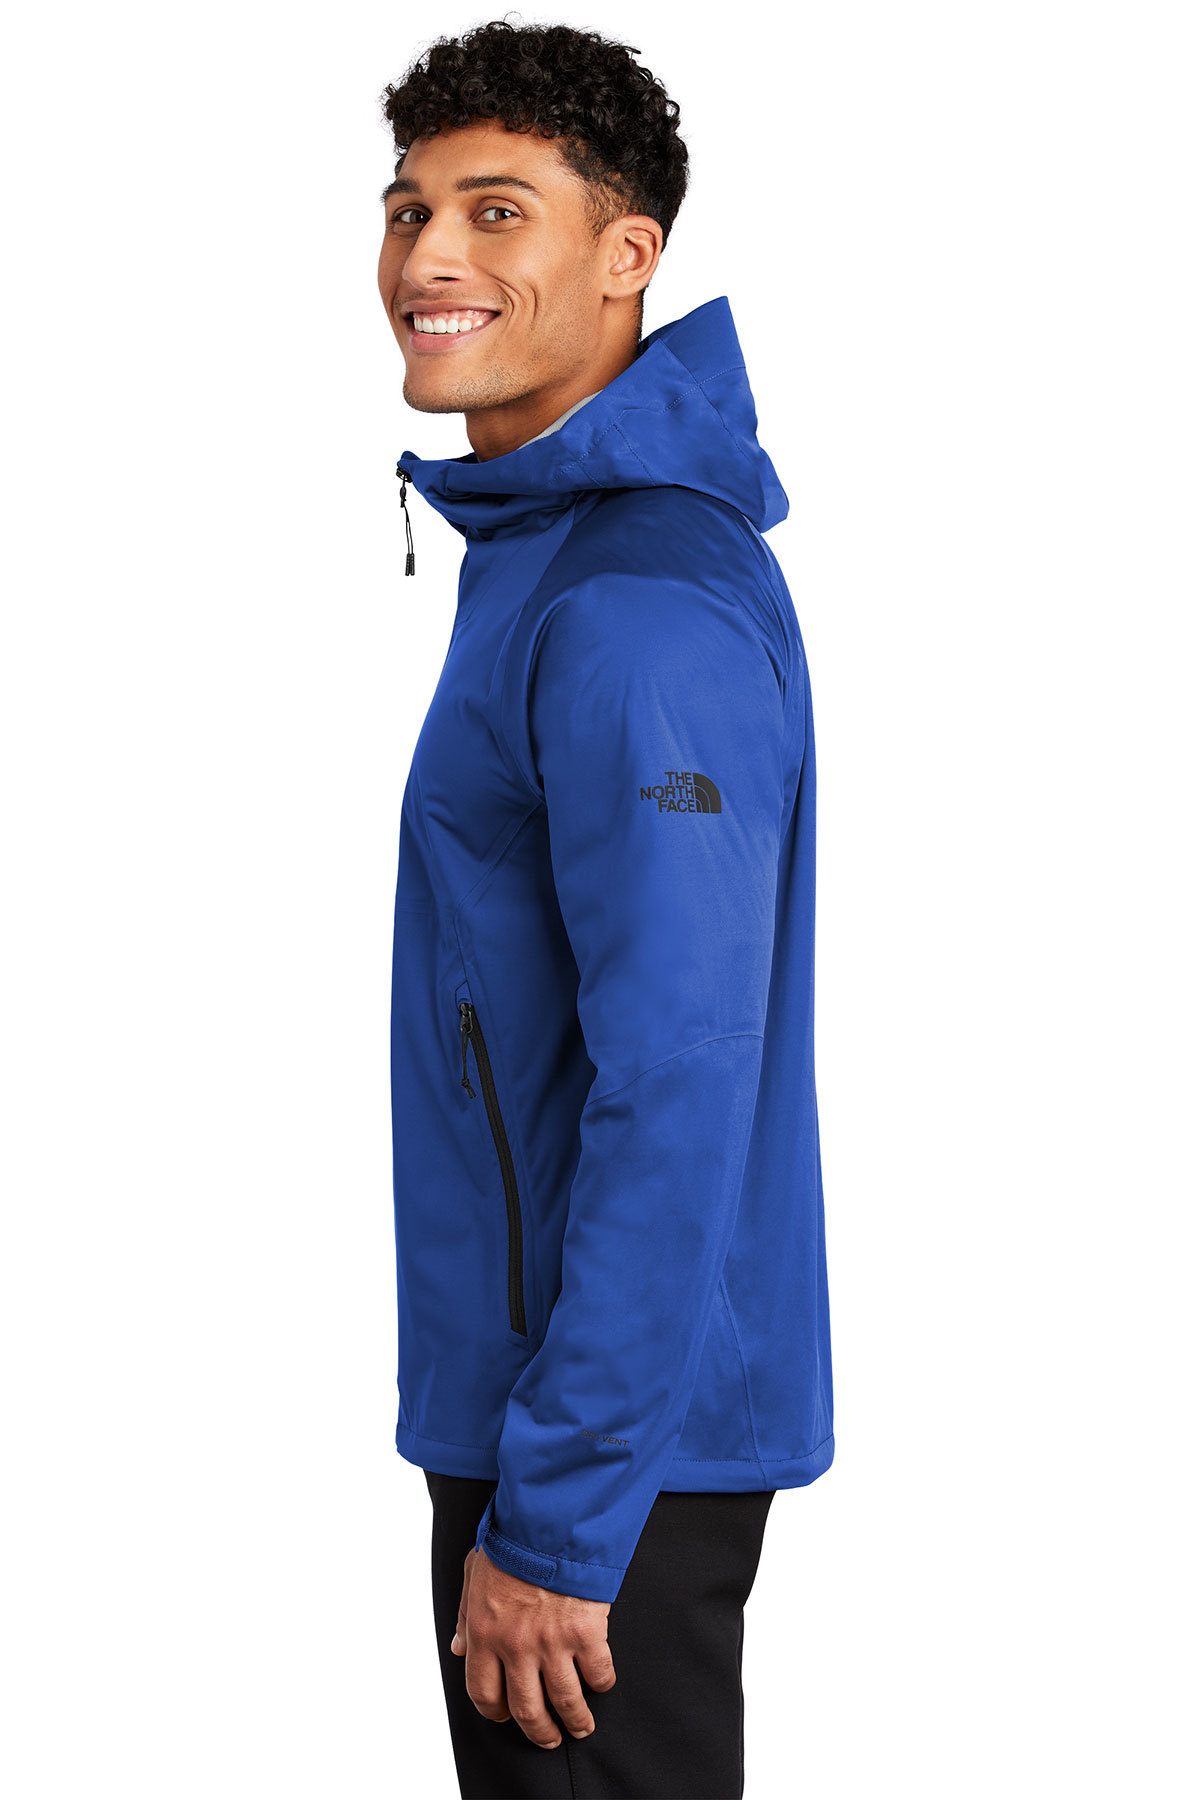 The North Face ® All-Weather DryVent 